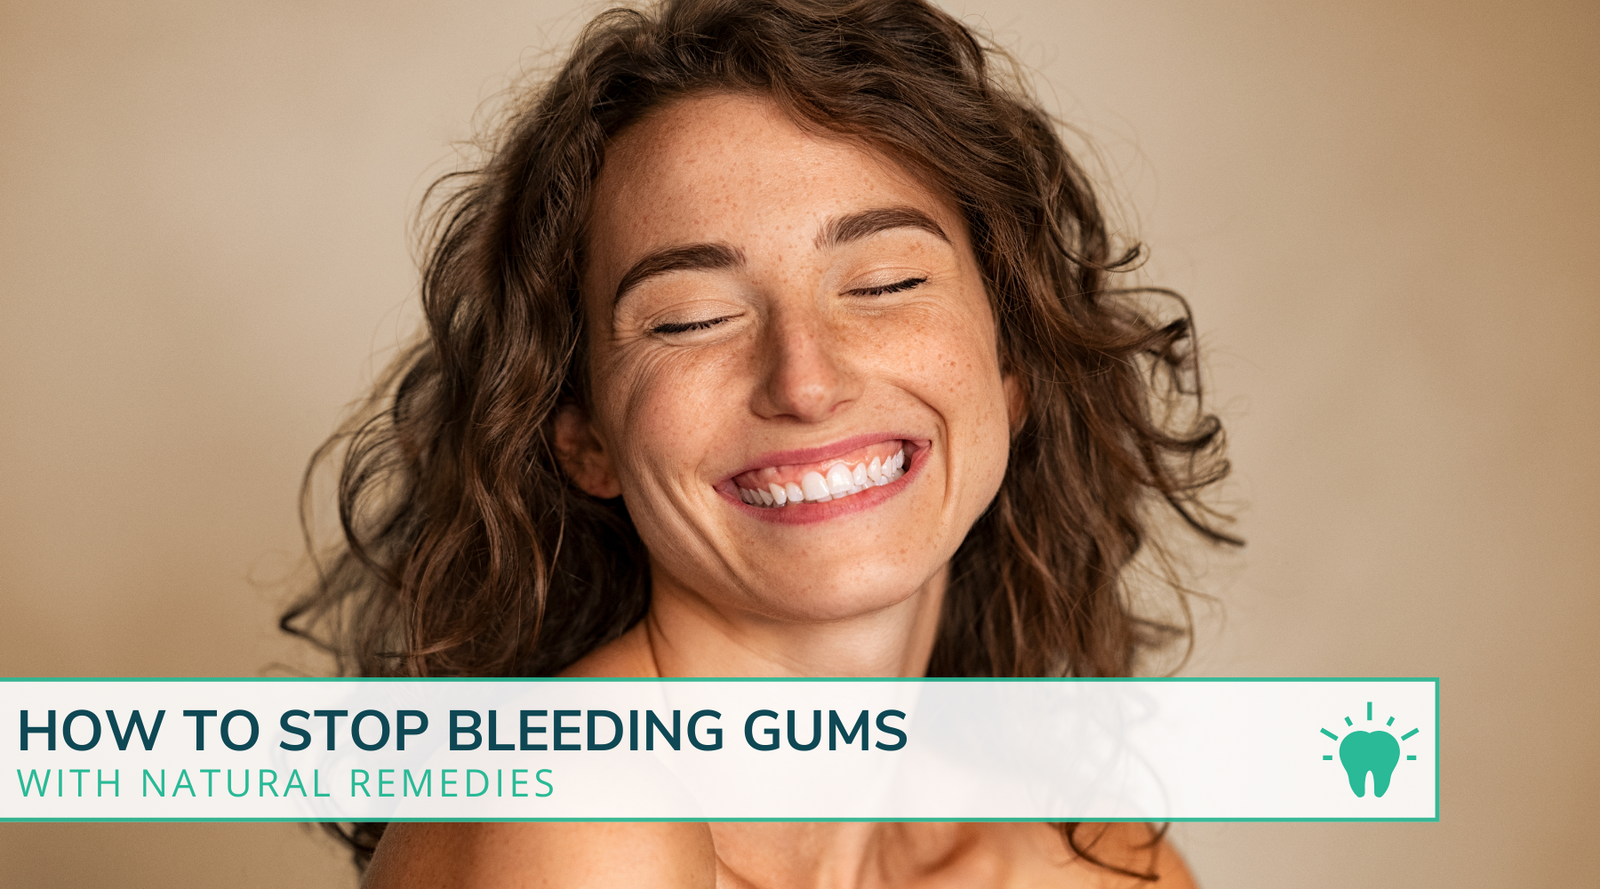 How to Stop Bleeding Gums with Natural Remedies